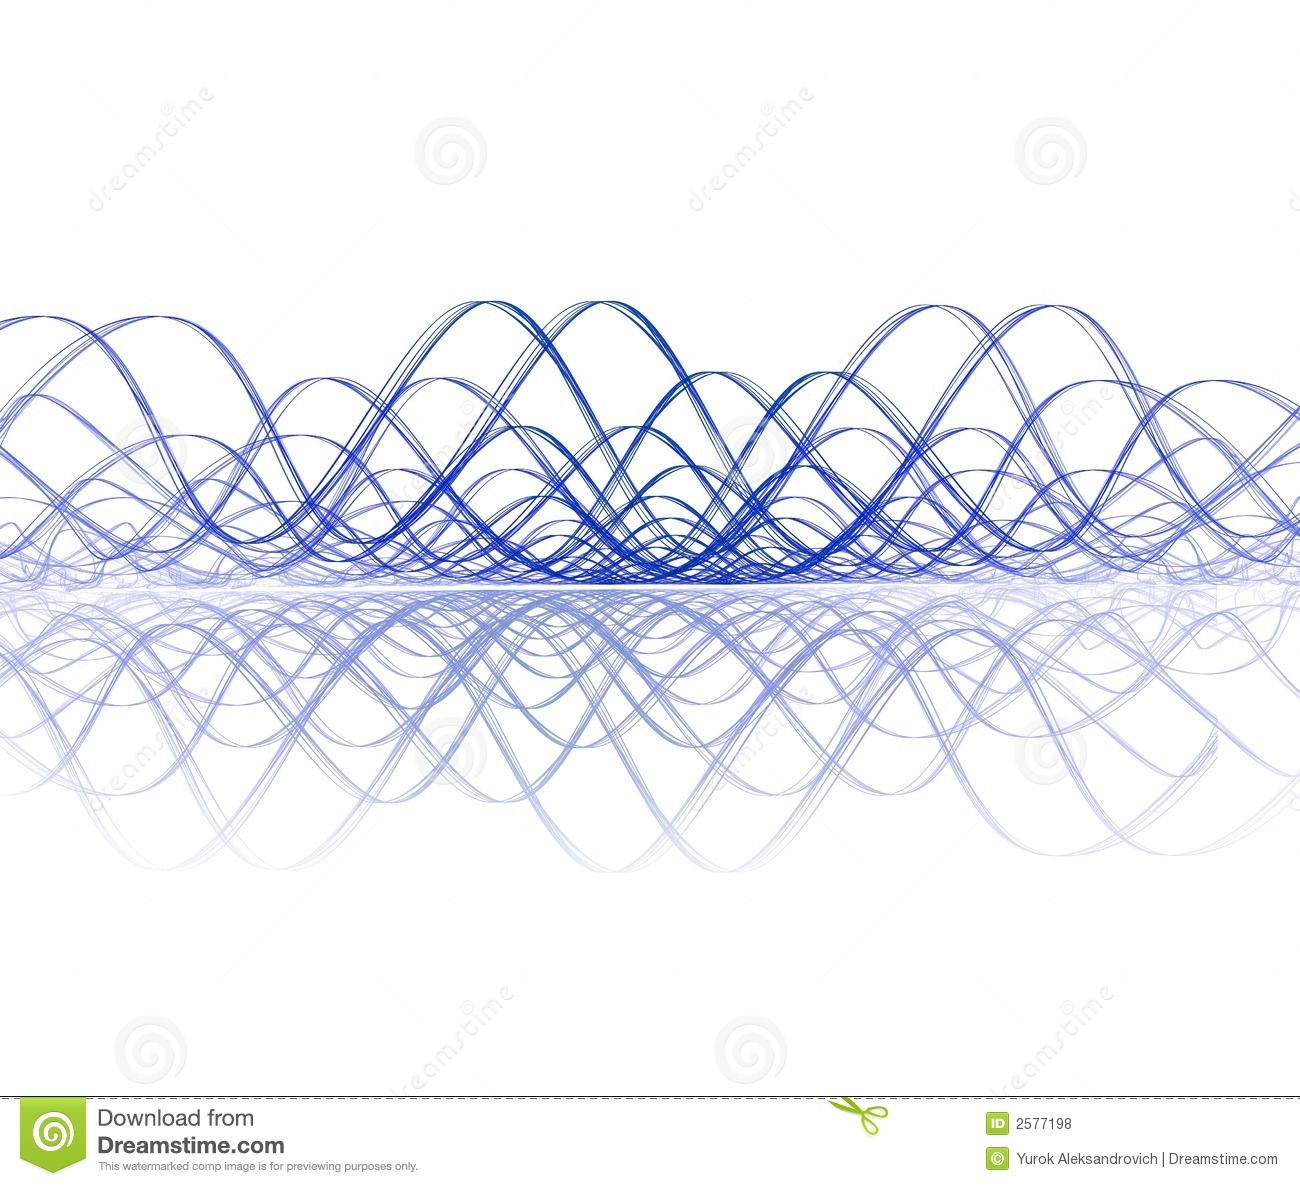 Cool Audio Sound Waves Vector Image